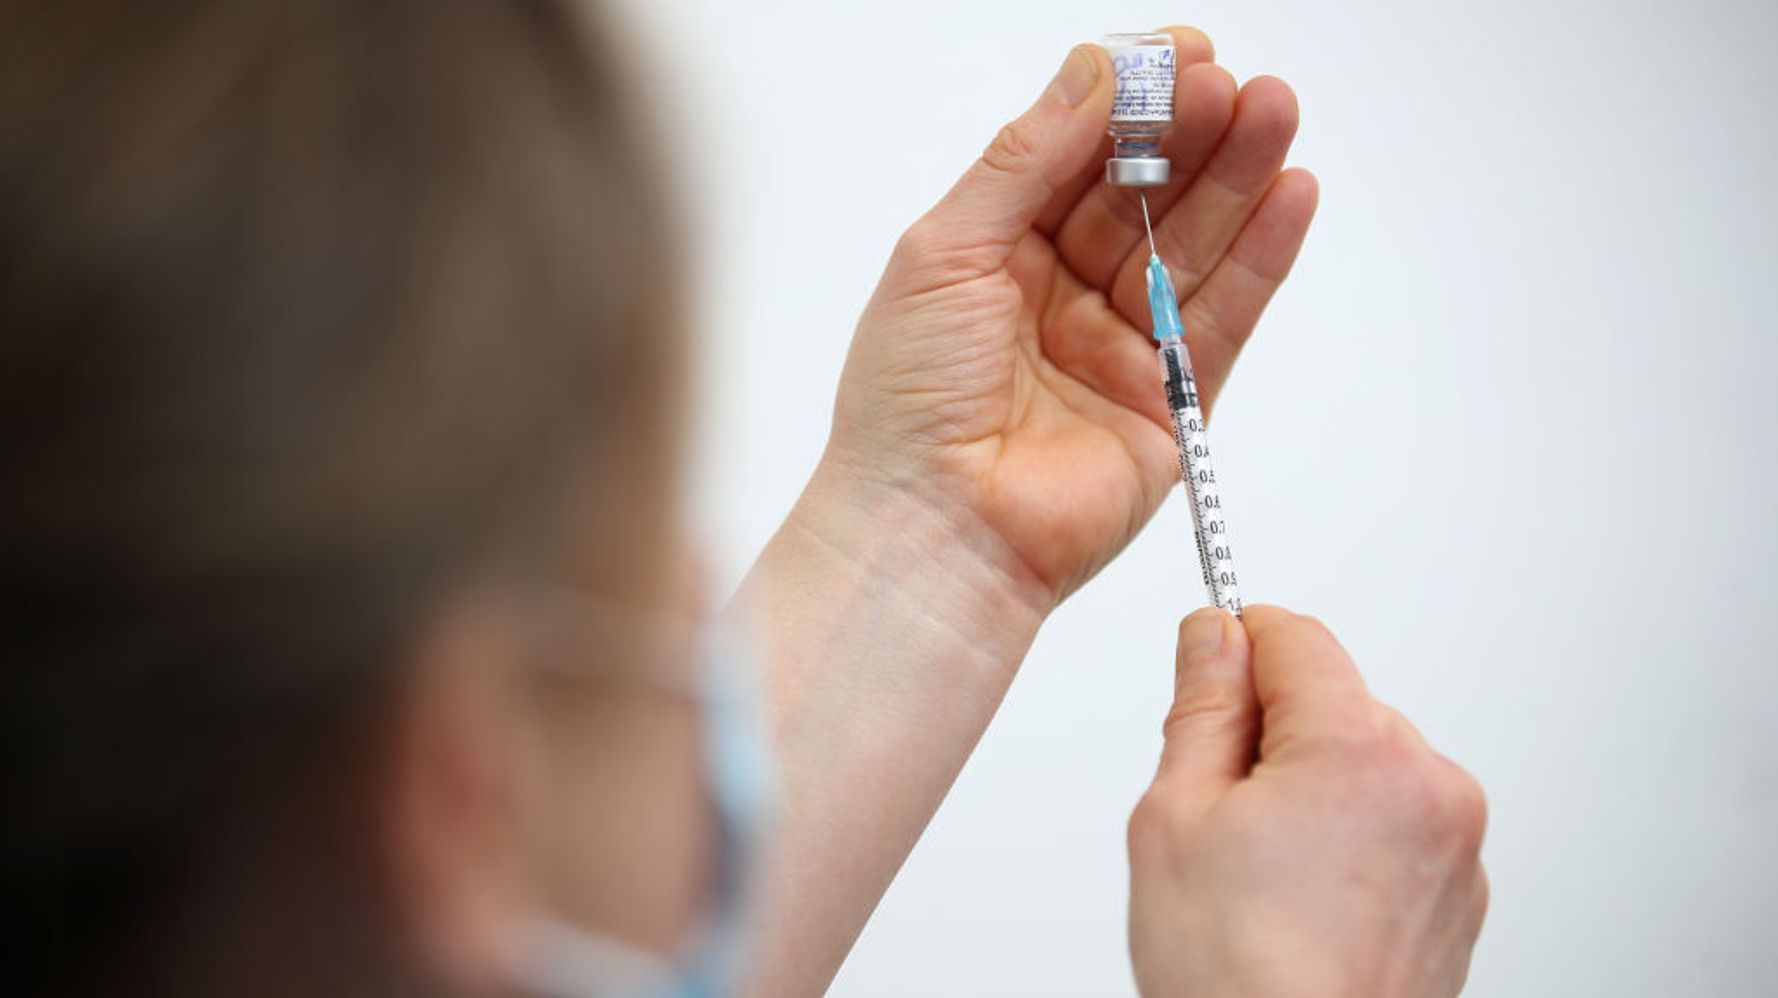 Pfizer COVID-19 vaccine reduces transmission after 1 dose, study concludes